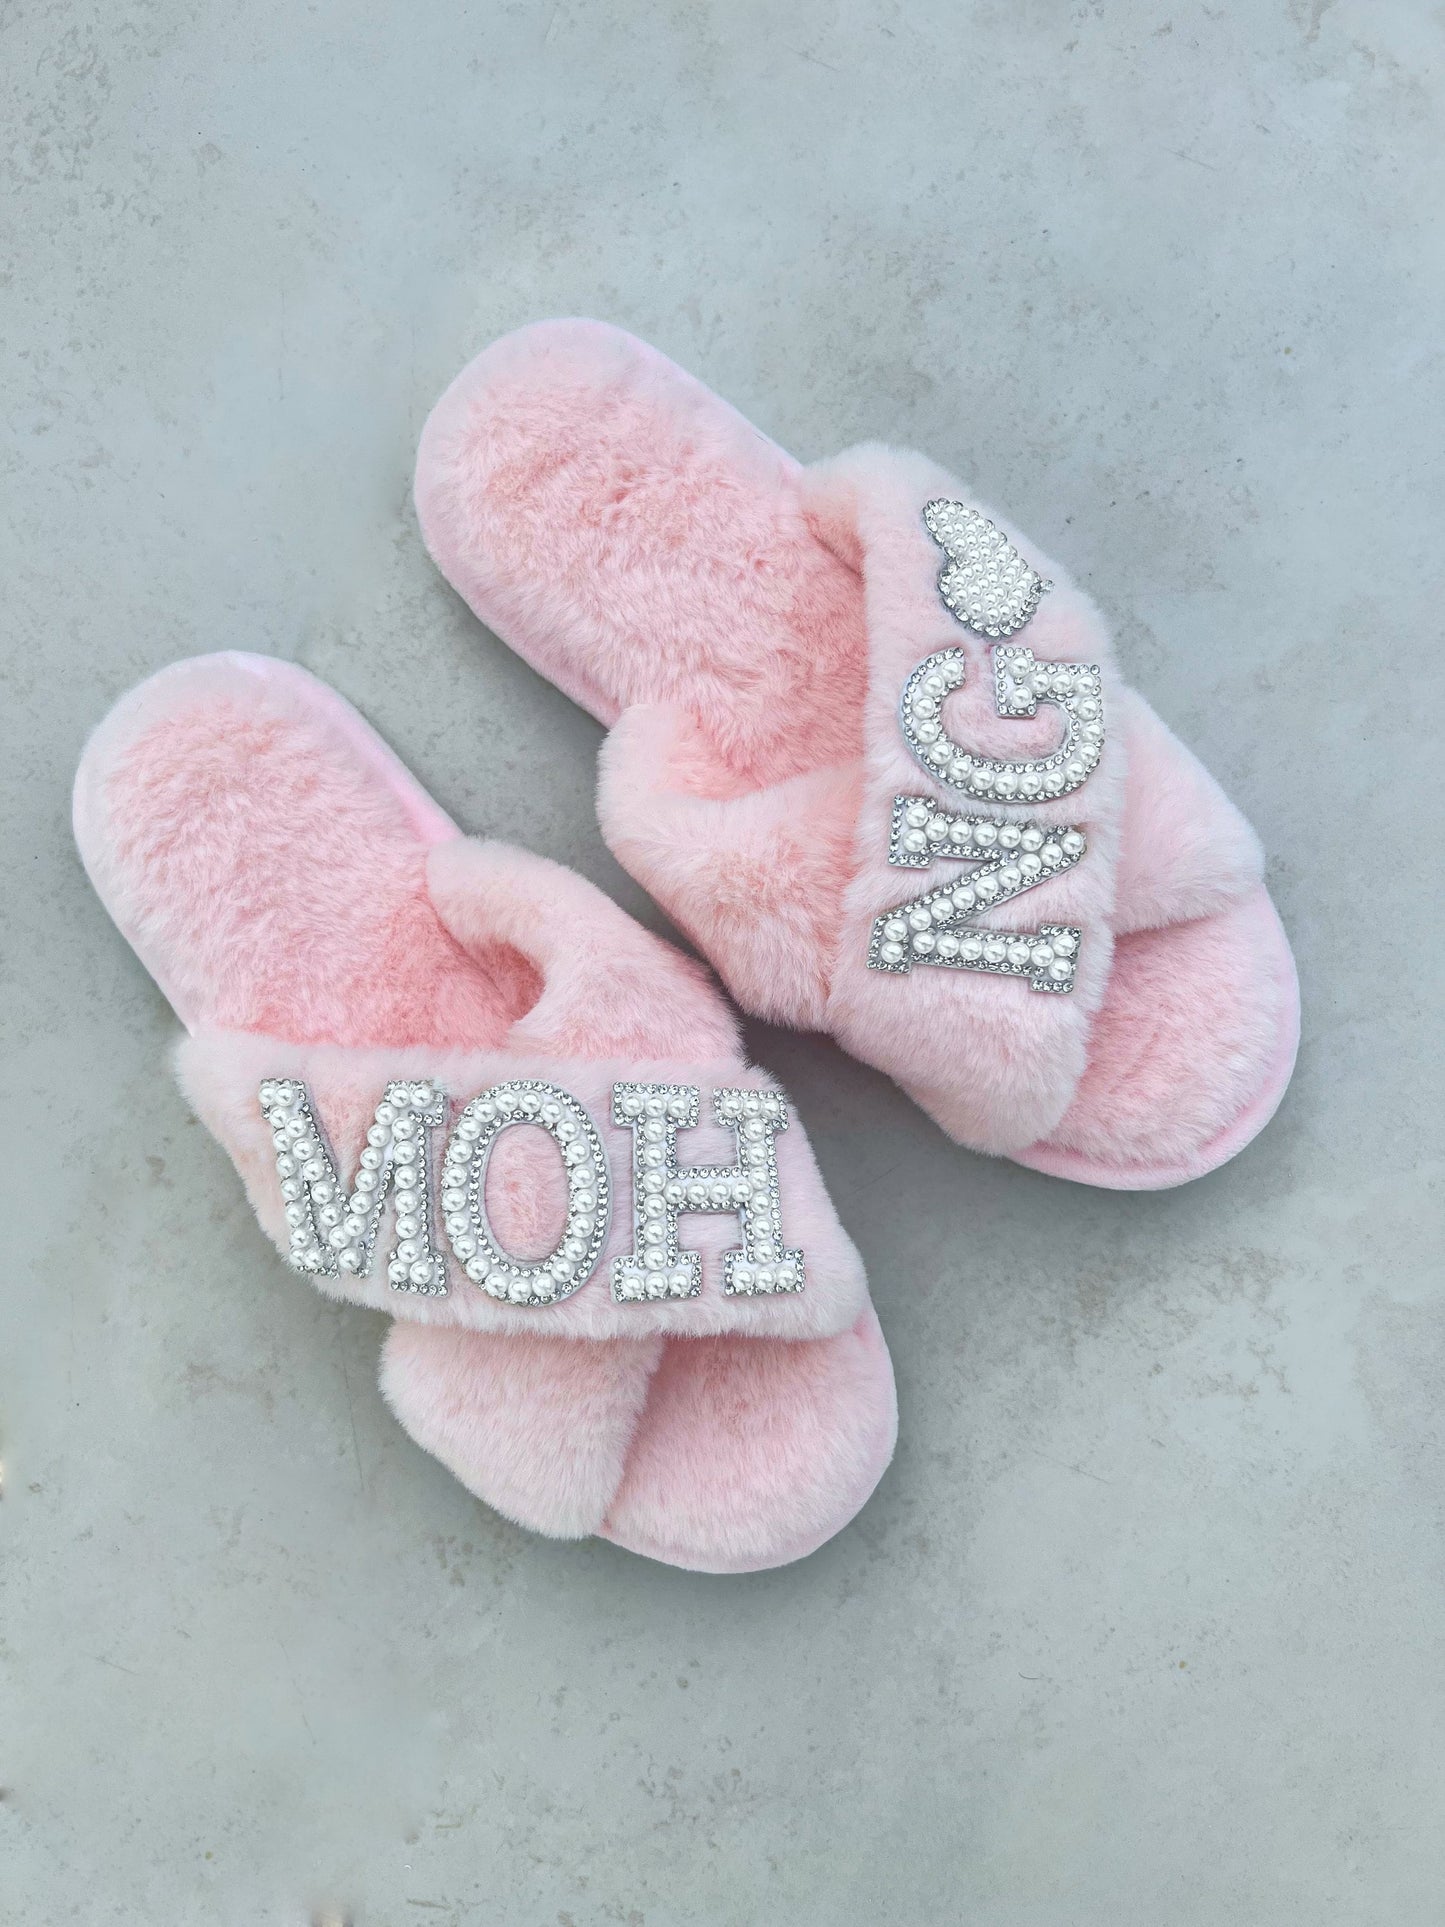 Bridesmaid gifts | bridesmaid slippers set of 6 | bridesmaid proposal | bride gift | bachelorette party favors | Maid of honor gift